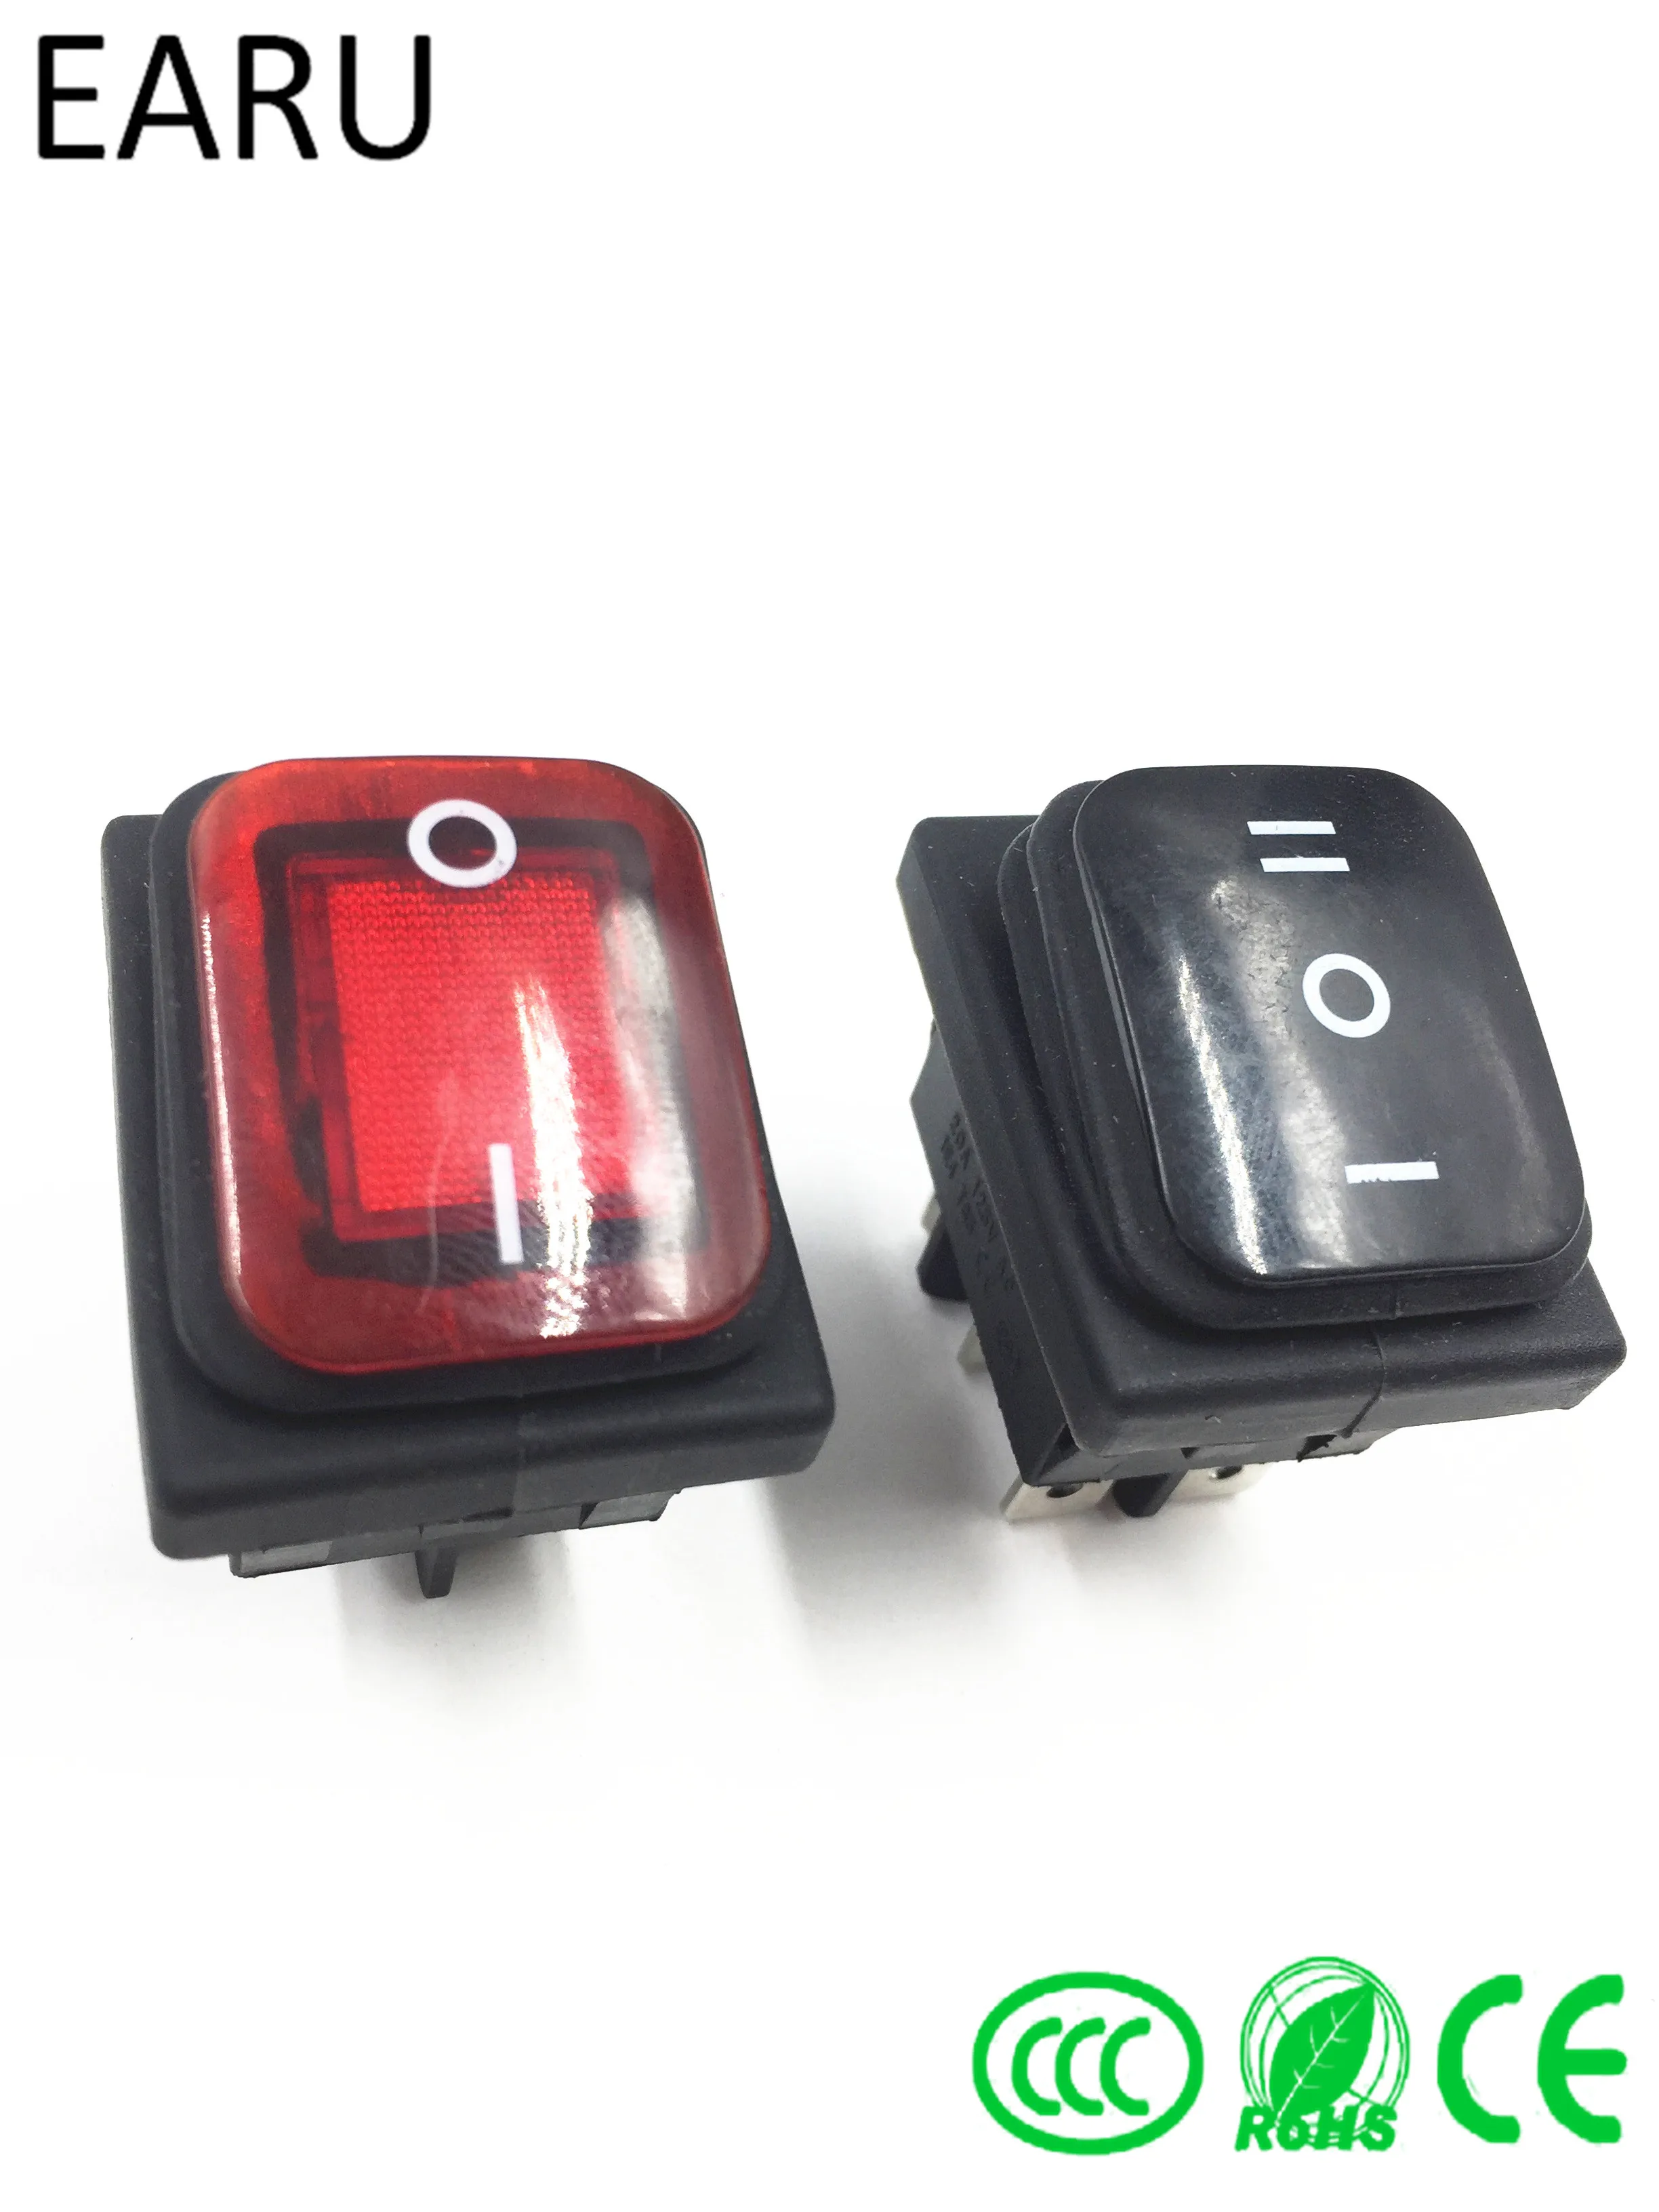 

Waterproof Dust Proof Latching Locking Rocker Toggle Switch,Red Green Black 4Pin 2Position, 6Pin 3Position AC250V/16A AC125V/20A